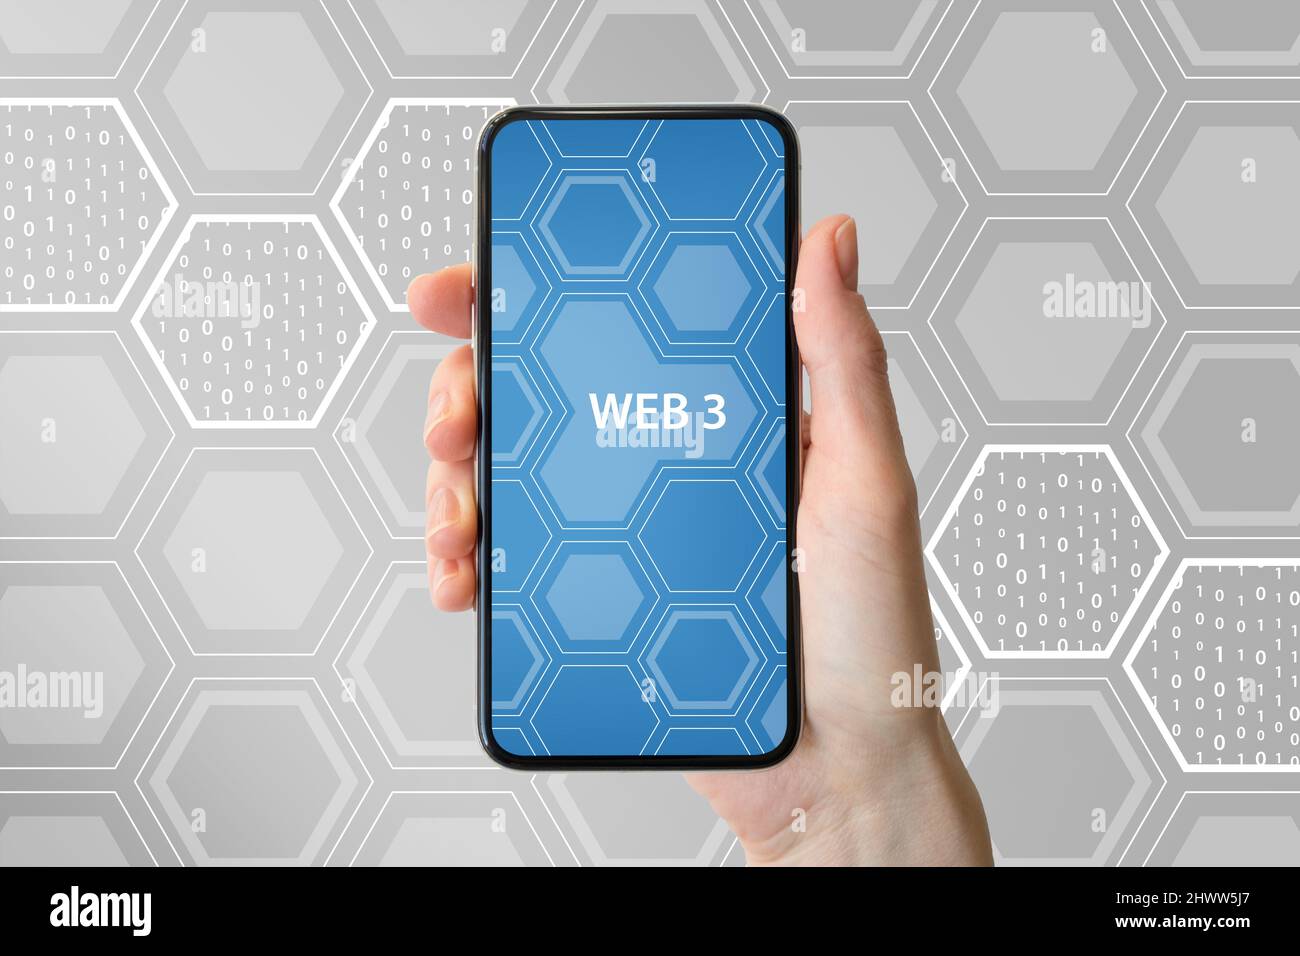 Web 3 or Web 3.0 concept. Hand holding next generation smart phone. Stock Photo